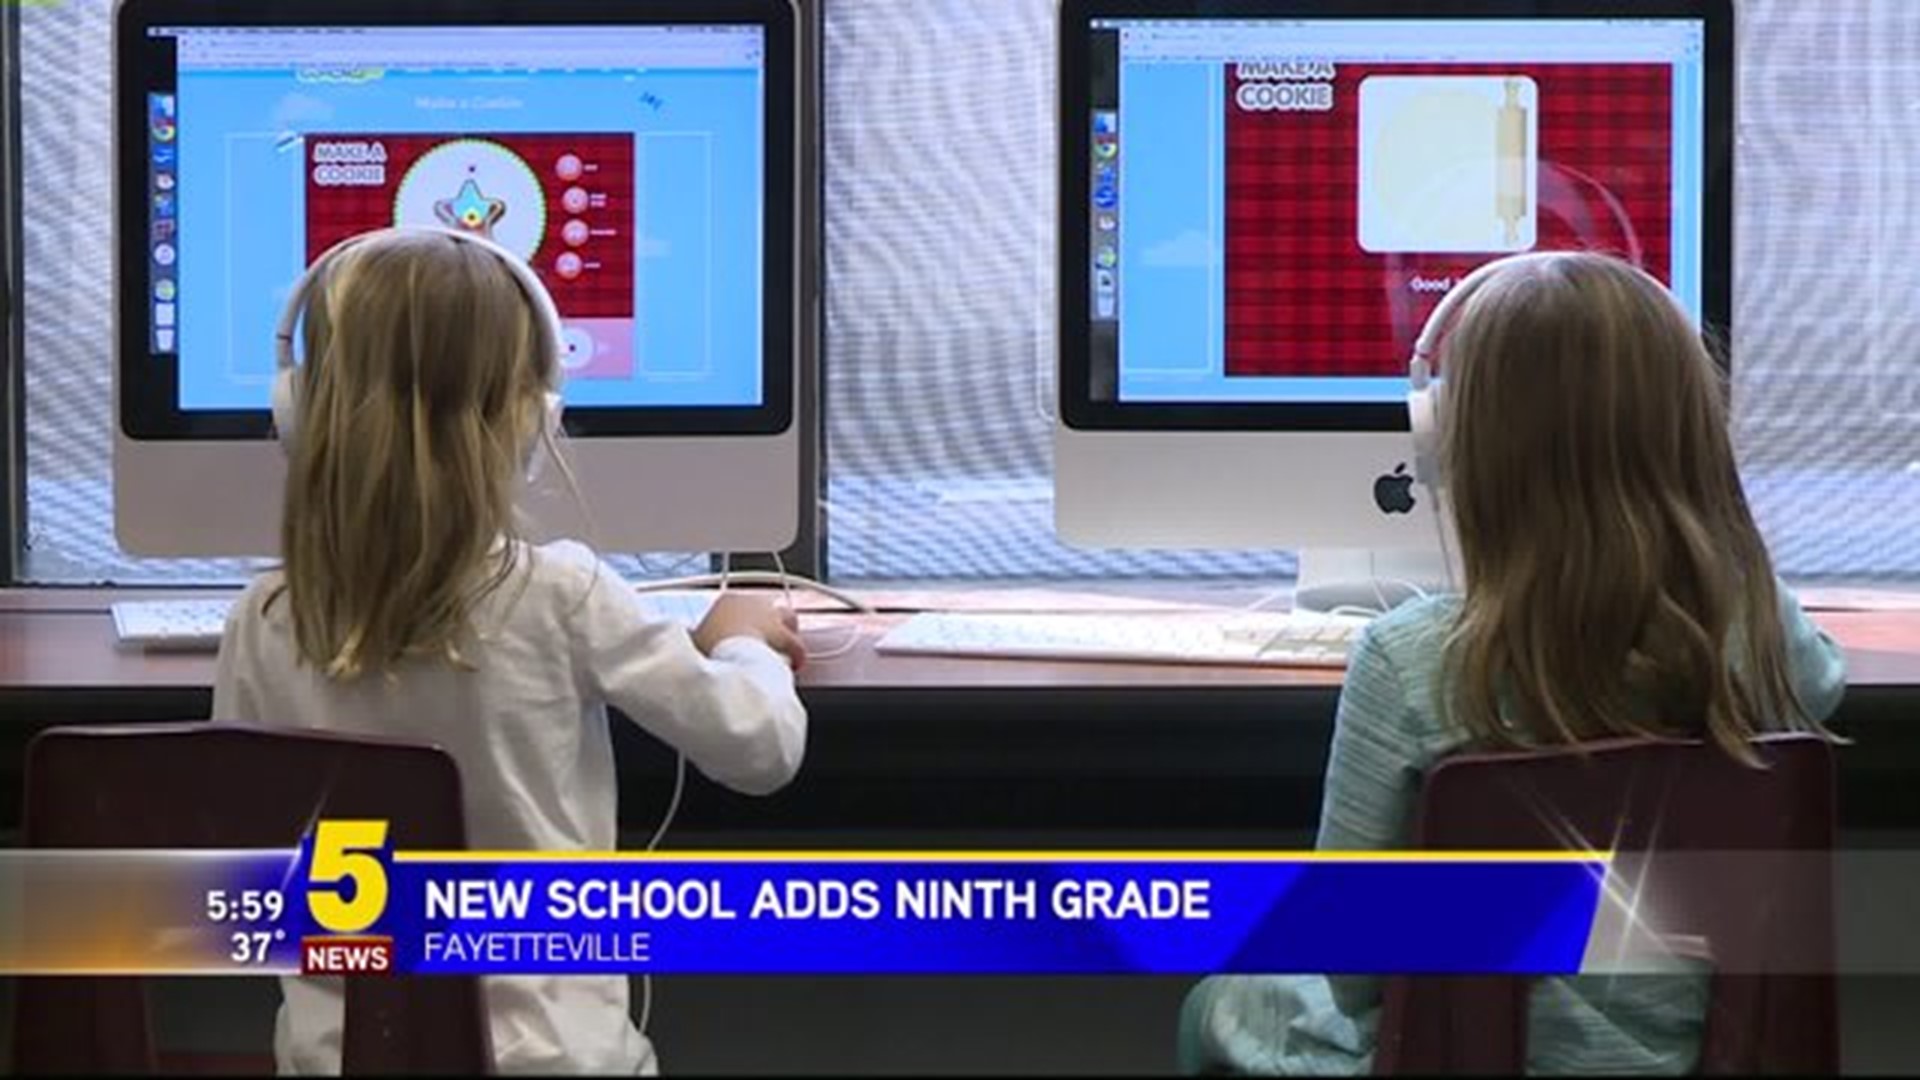 The New School Adds Ninth Grade